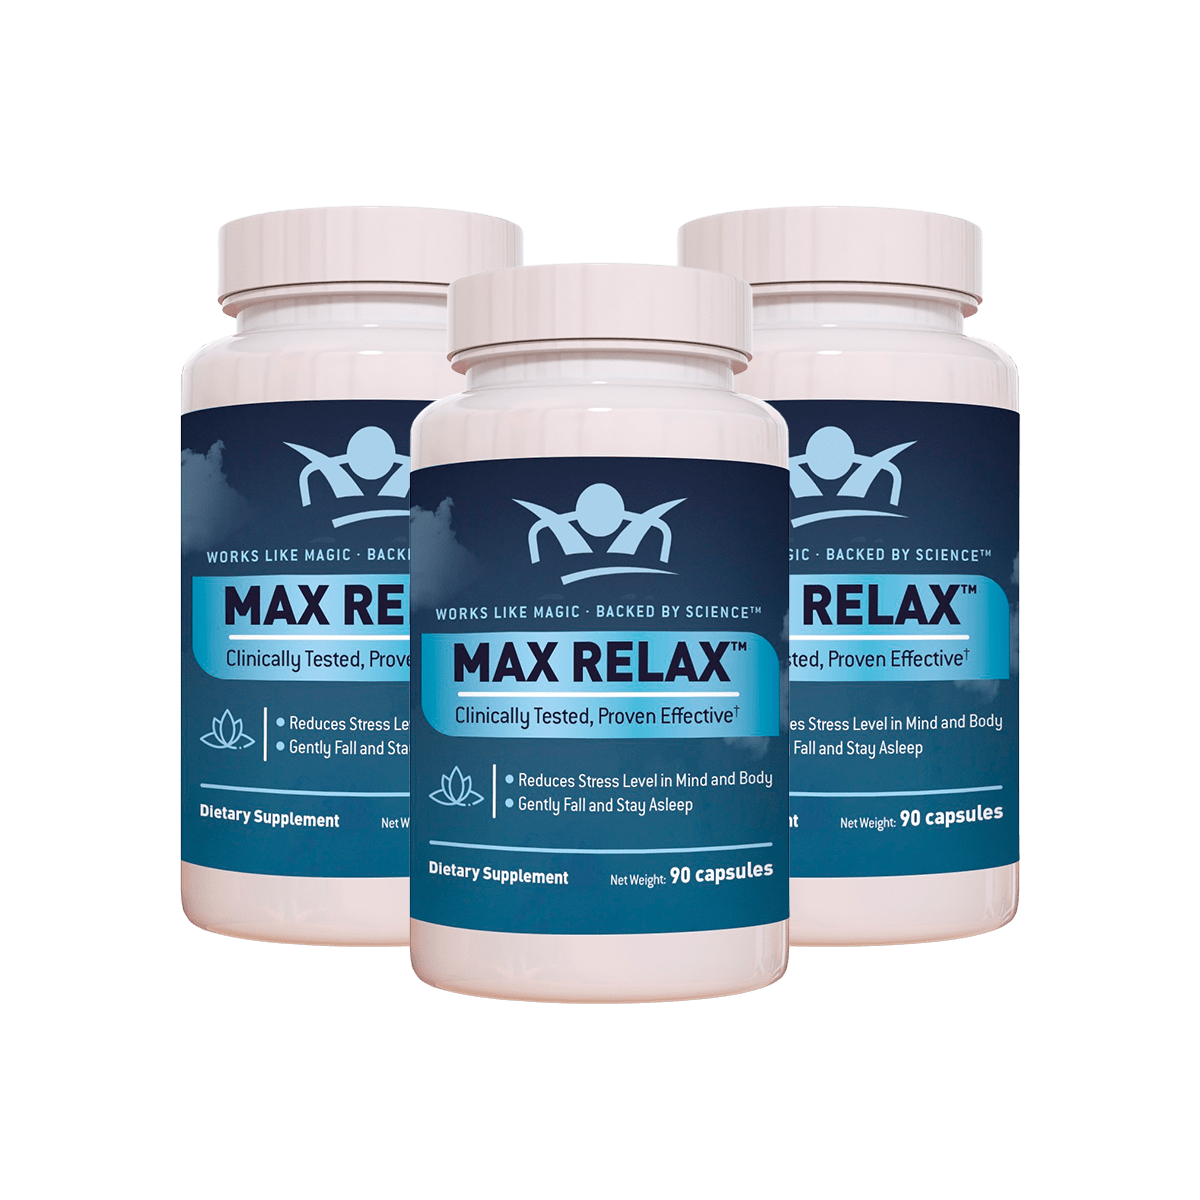 Max Relax Buy 2 Get 1 Free